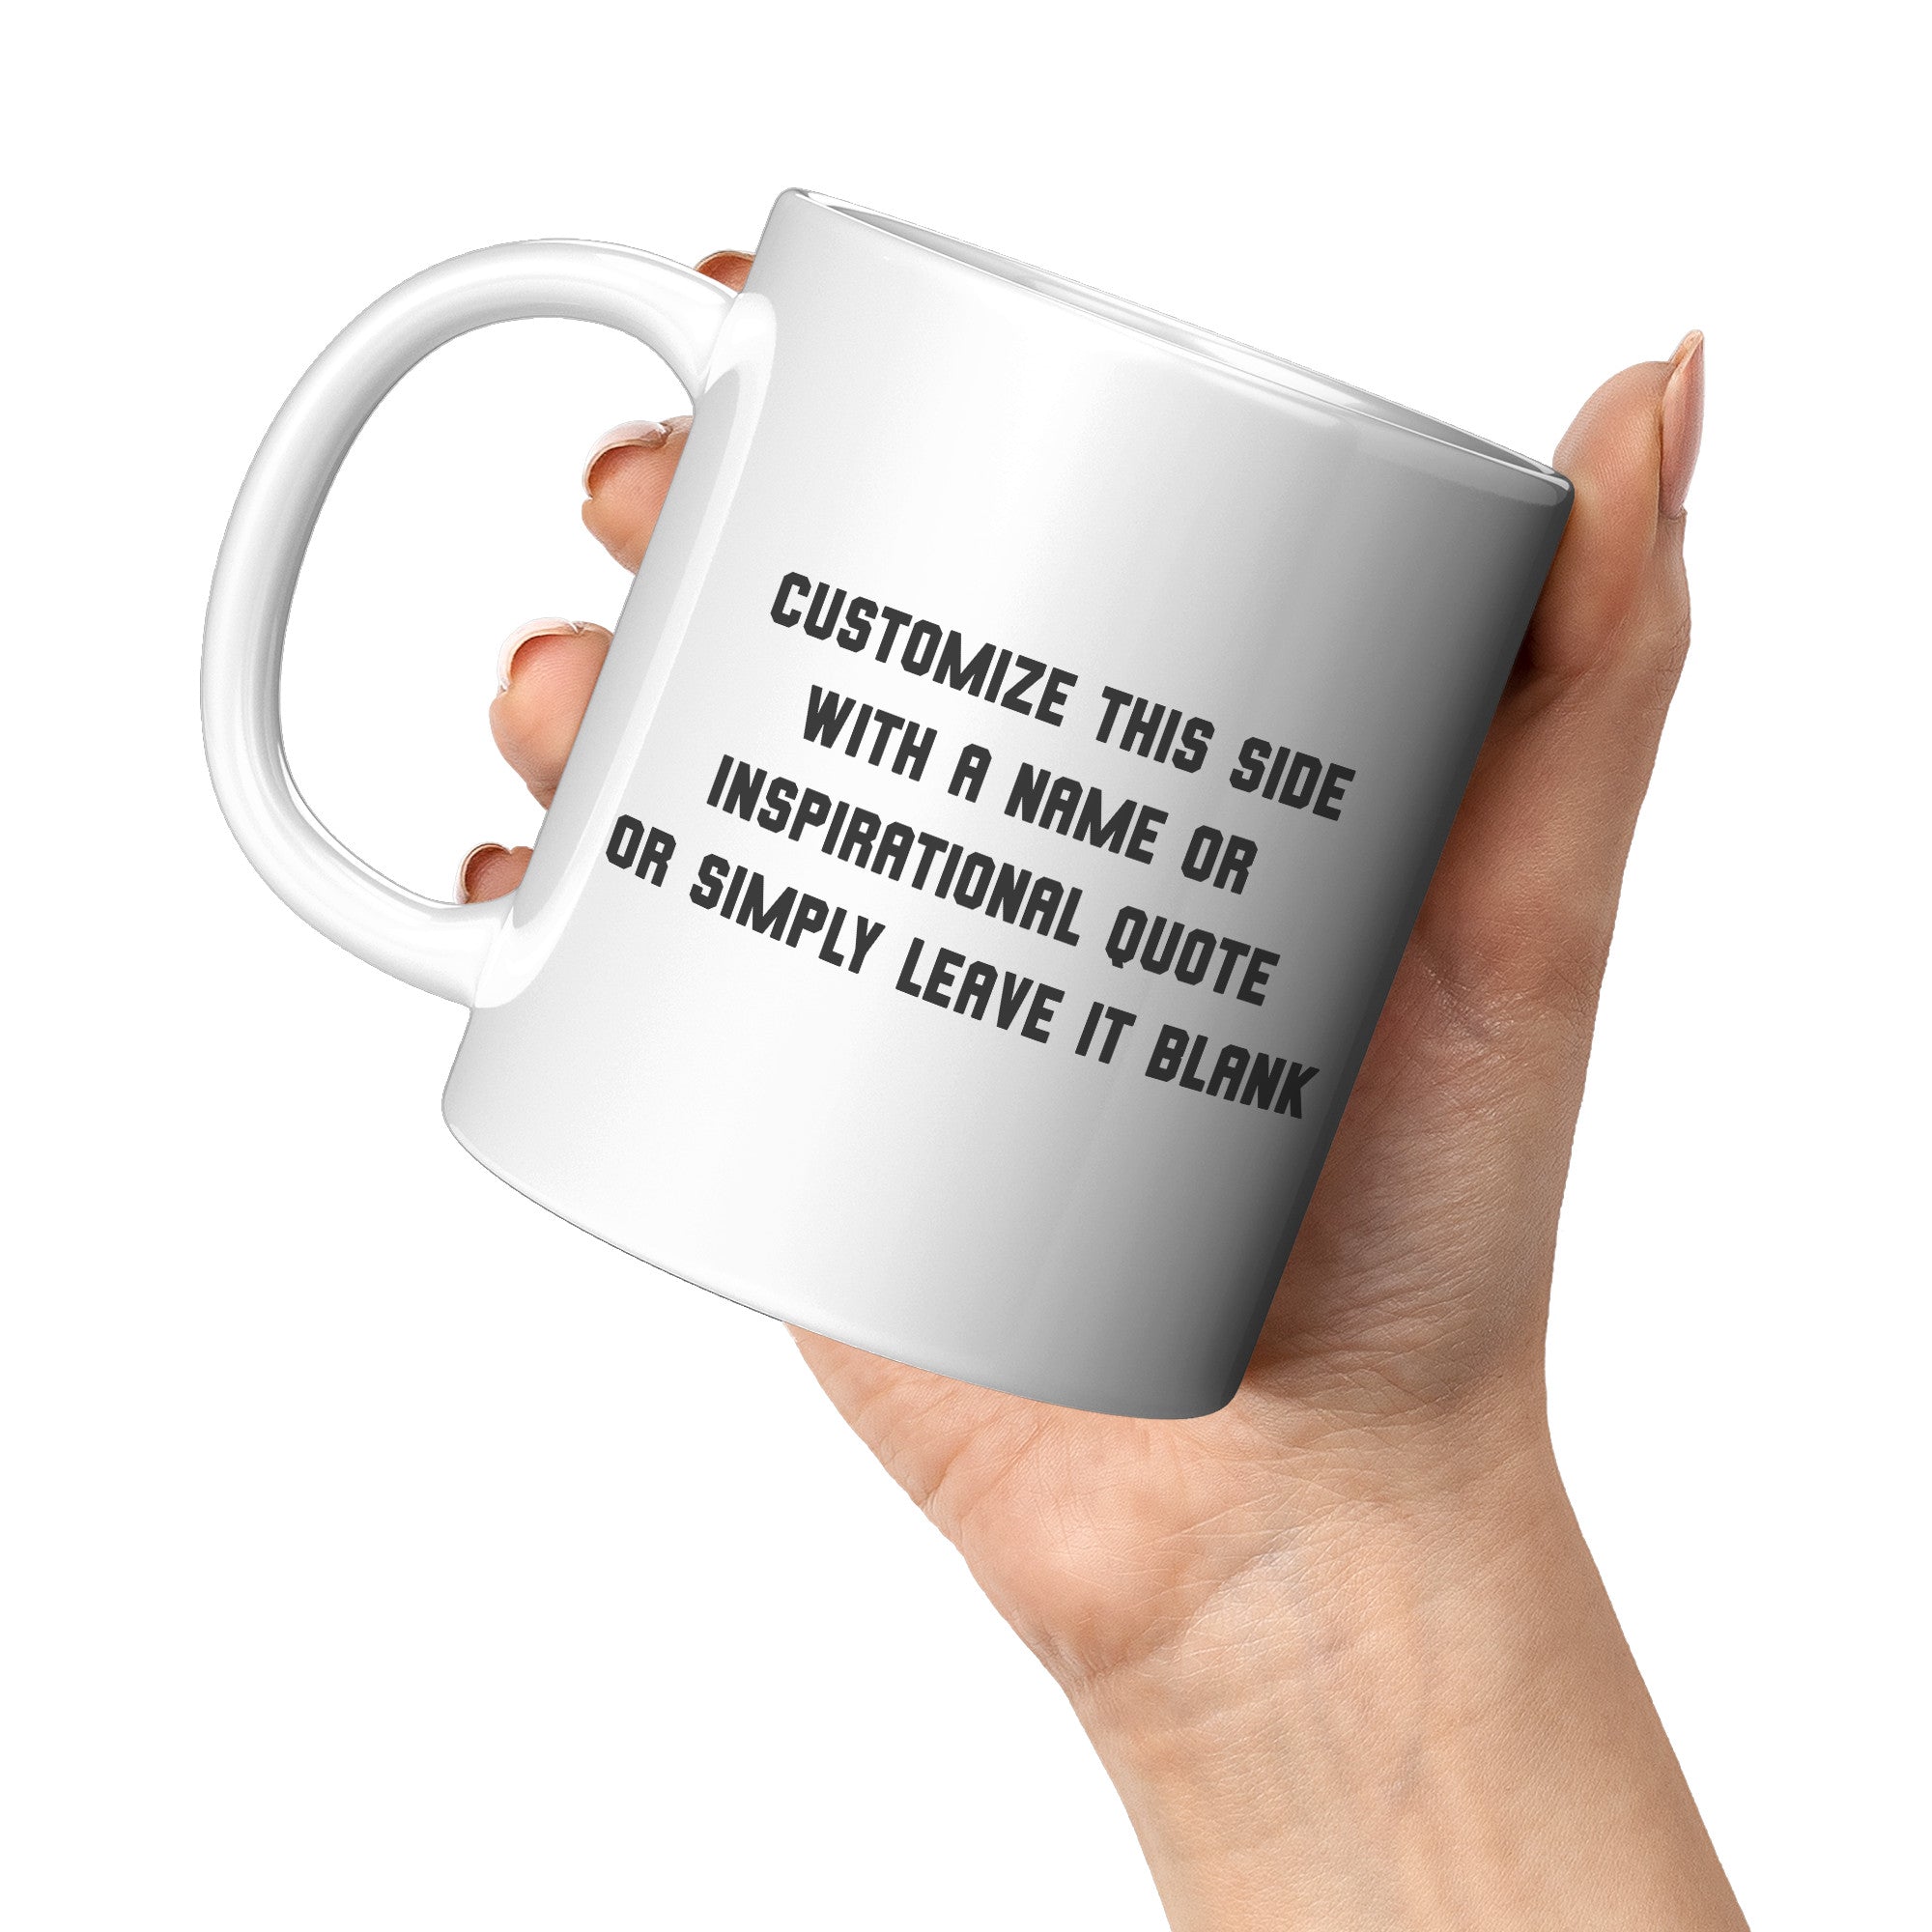 Male Runner Inspirational Mug - Motivational Running Quotes Cup - Perfect Gift for Marathon Men - Runner's Daily Dose of Determination - H